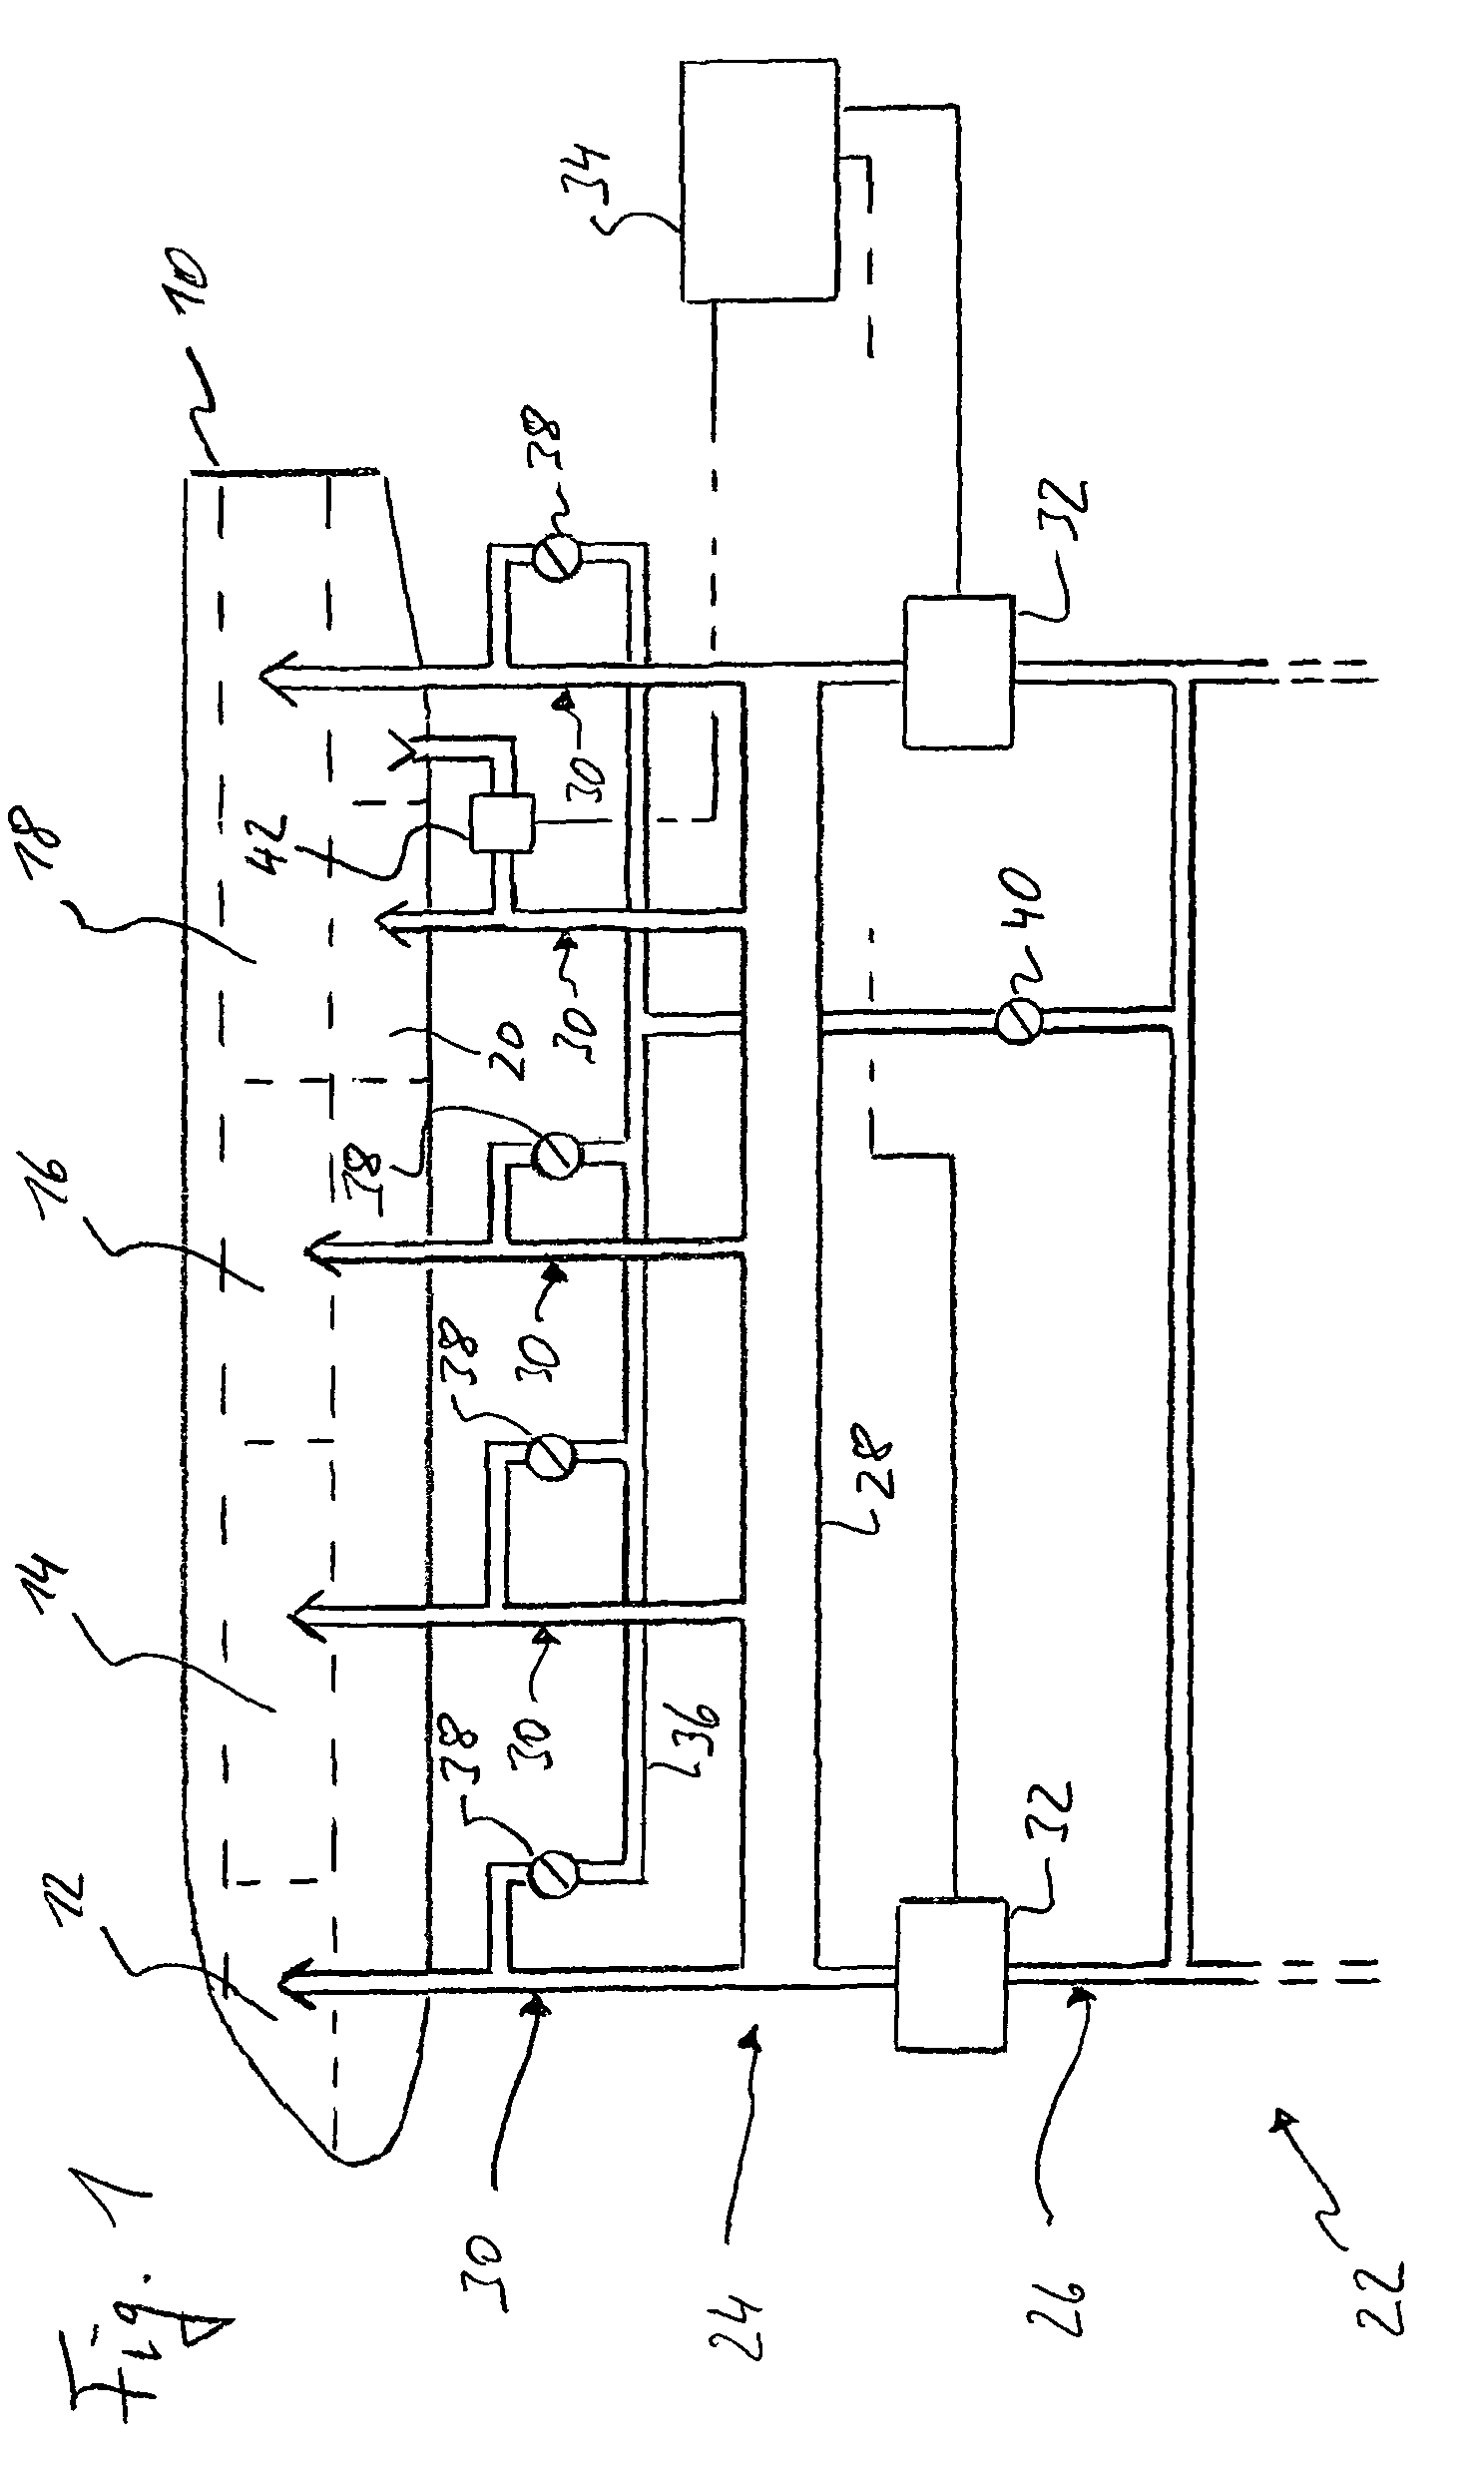 Air conditioning arrangement for an aircraft with a plurality of climate zones that may be individually temperature-controlled